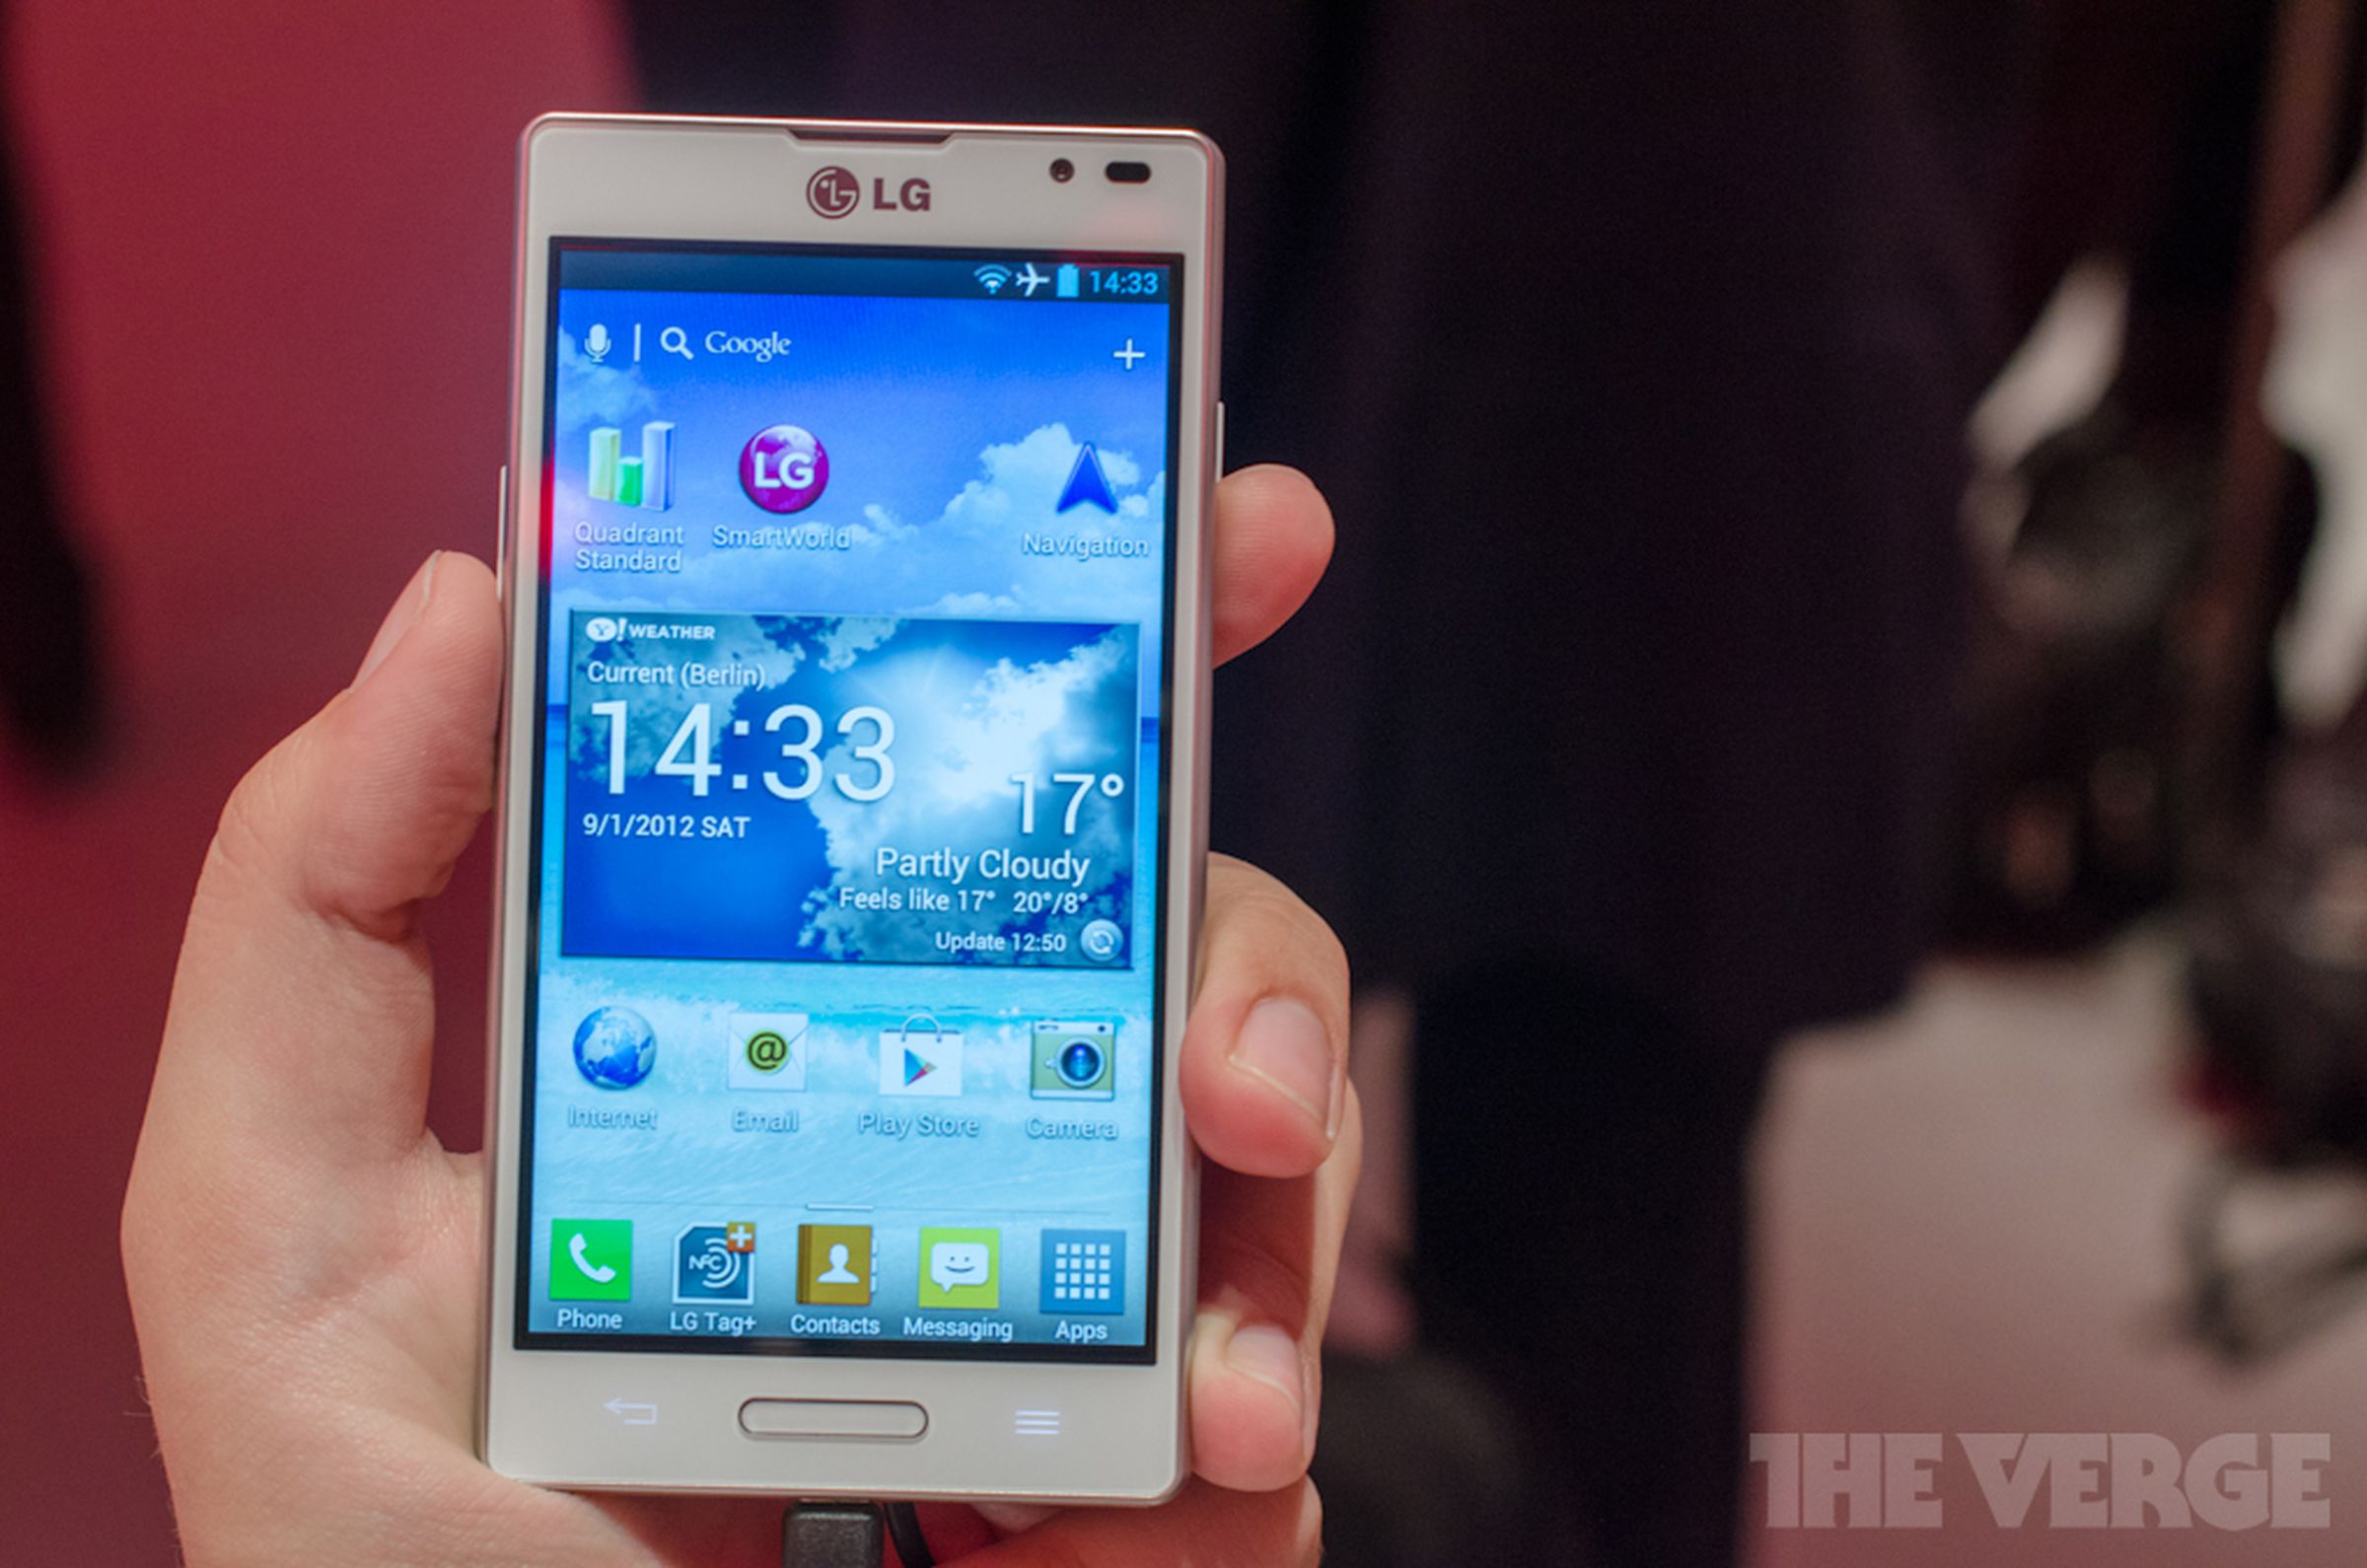 LG Optimus L9 hands-on pictures